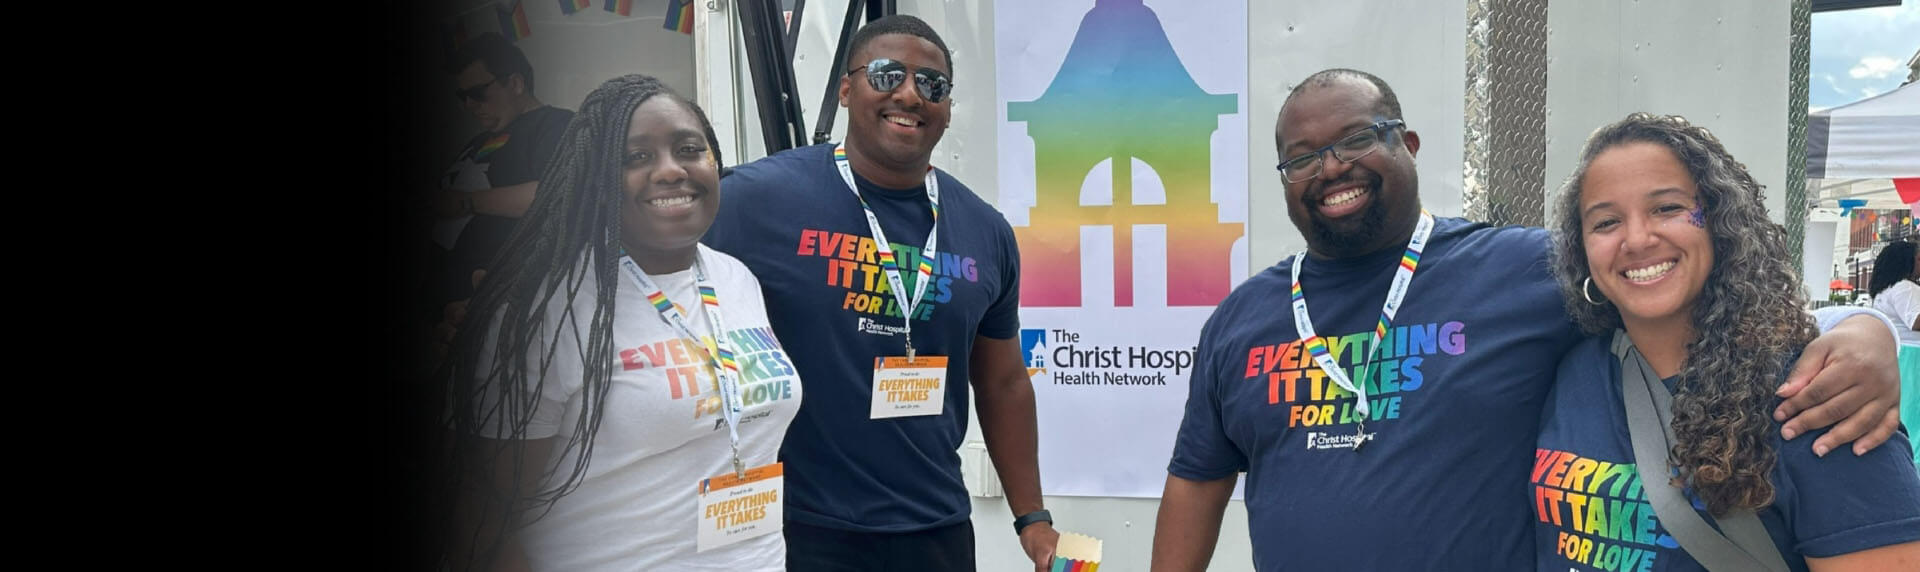 A group of diverse Christ Hospital employees smiling with the headline: “Everything is takes so everyone can connect”